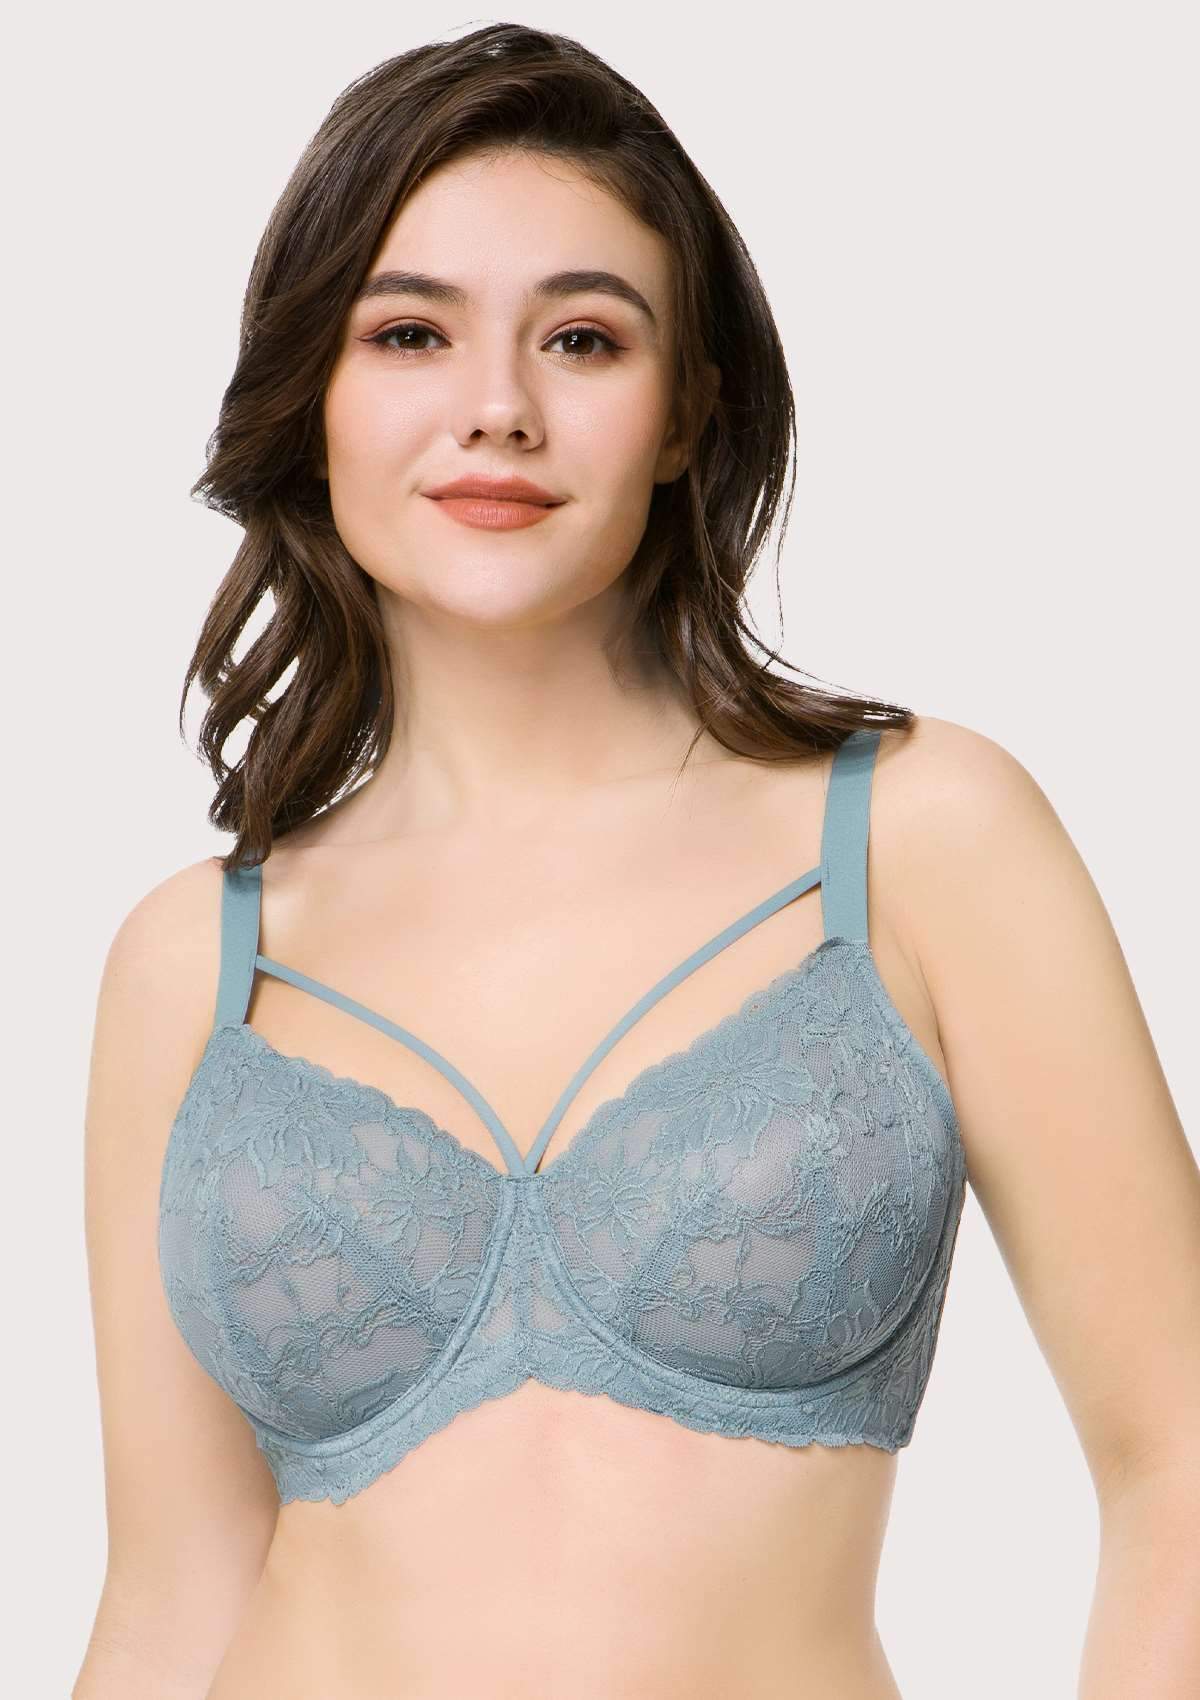 HSIA Pretty In Petals Unlined Lace Bra: Comfortable And Supportive Bra - Pewter Blue / 42 / C